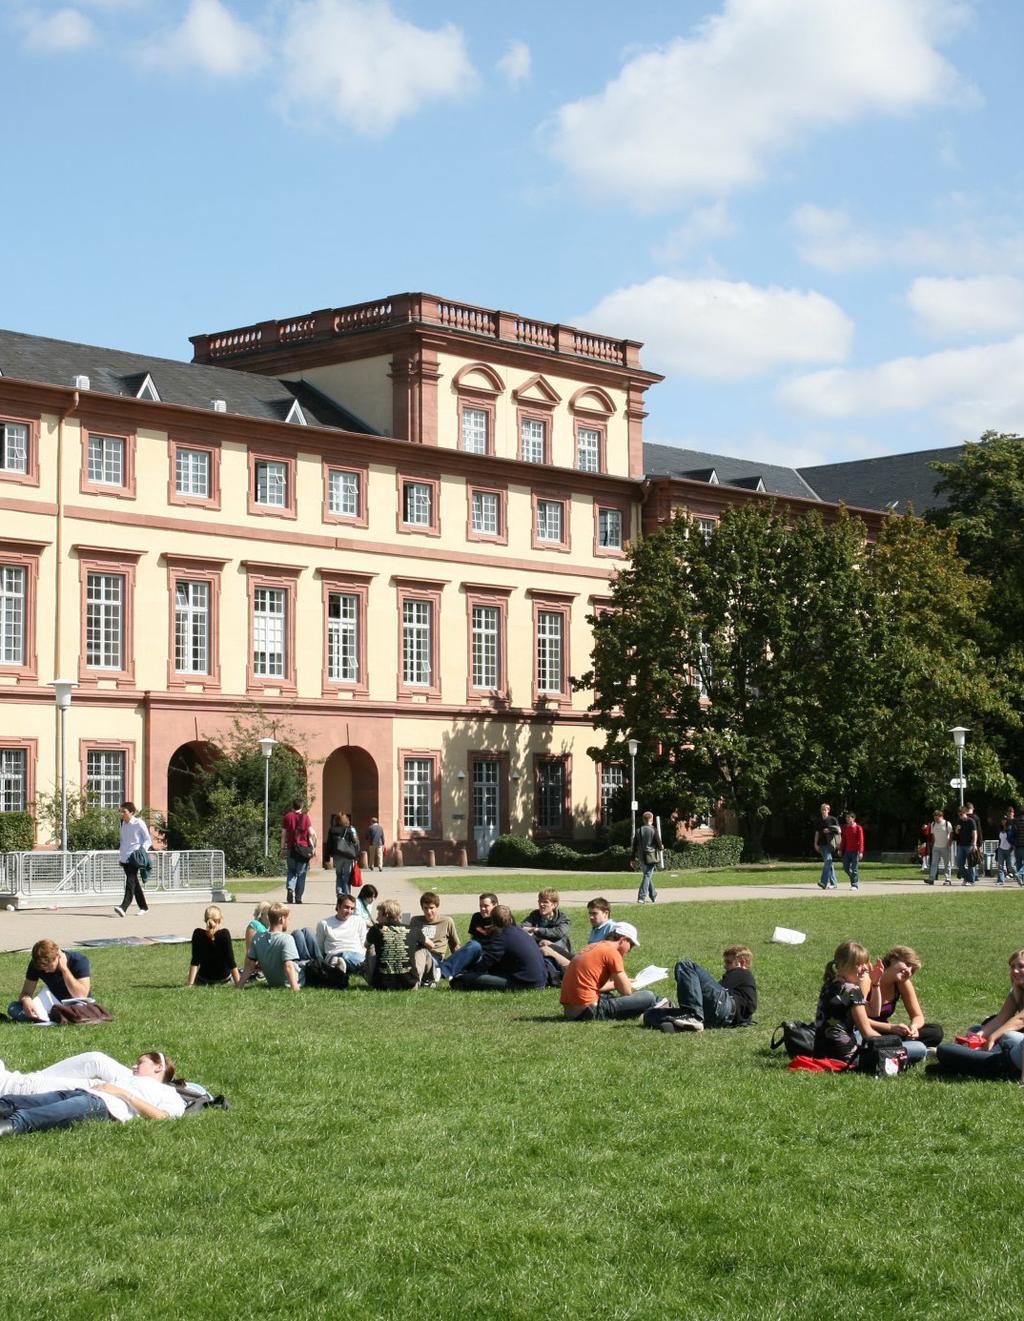 Funding Scholarships The University of Mannheim awards around 250 scholarships per year and has one of the most differentiated scholarship systems among public higher education institutions in